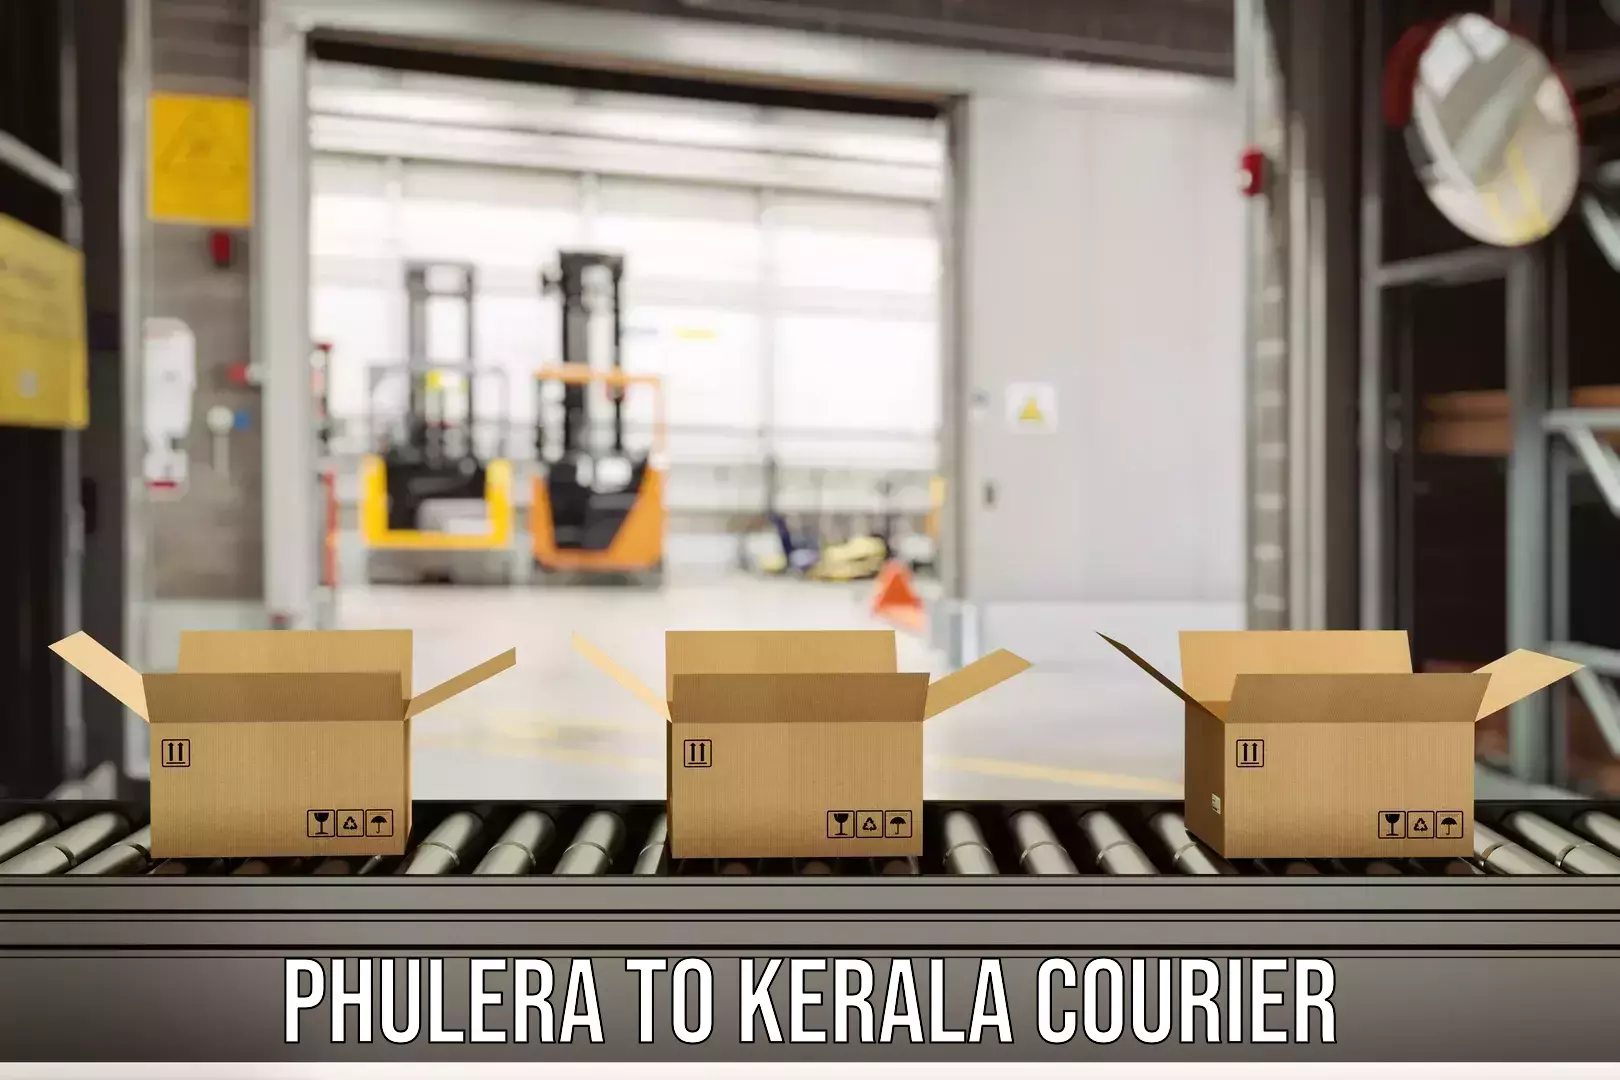 Courier service comparison Phulera to Chalakudy